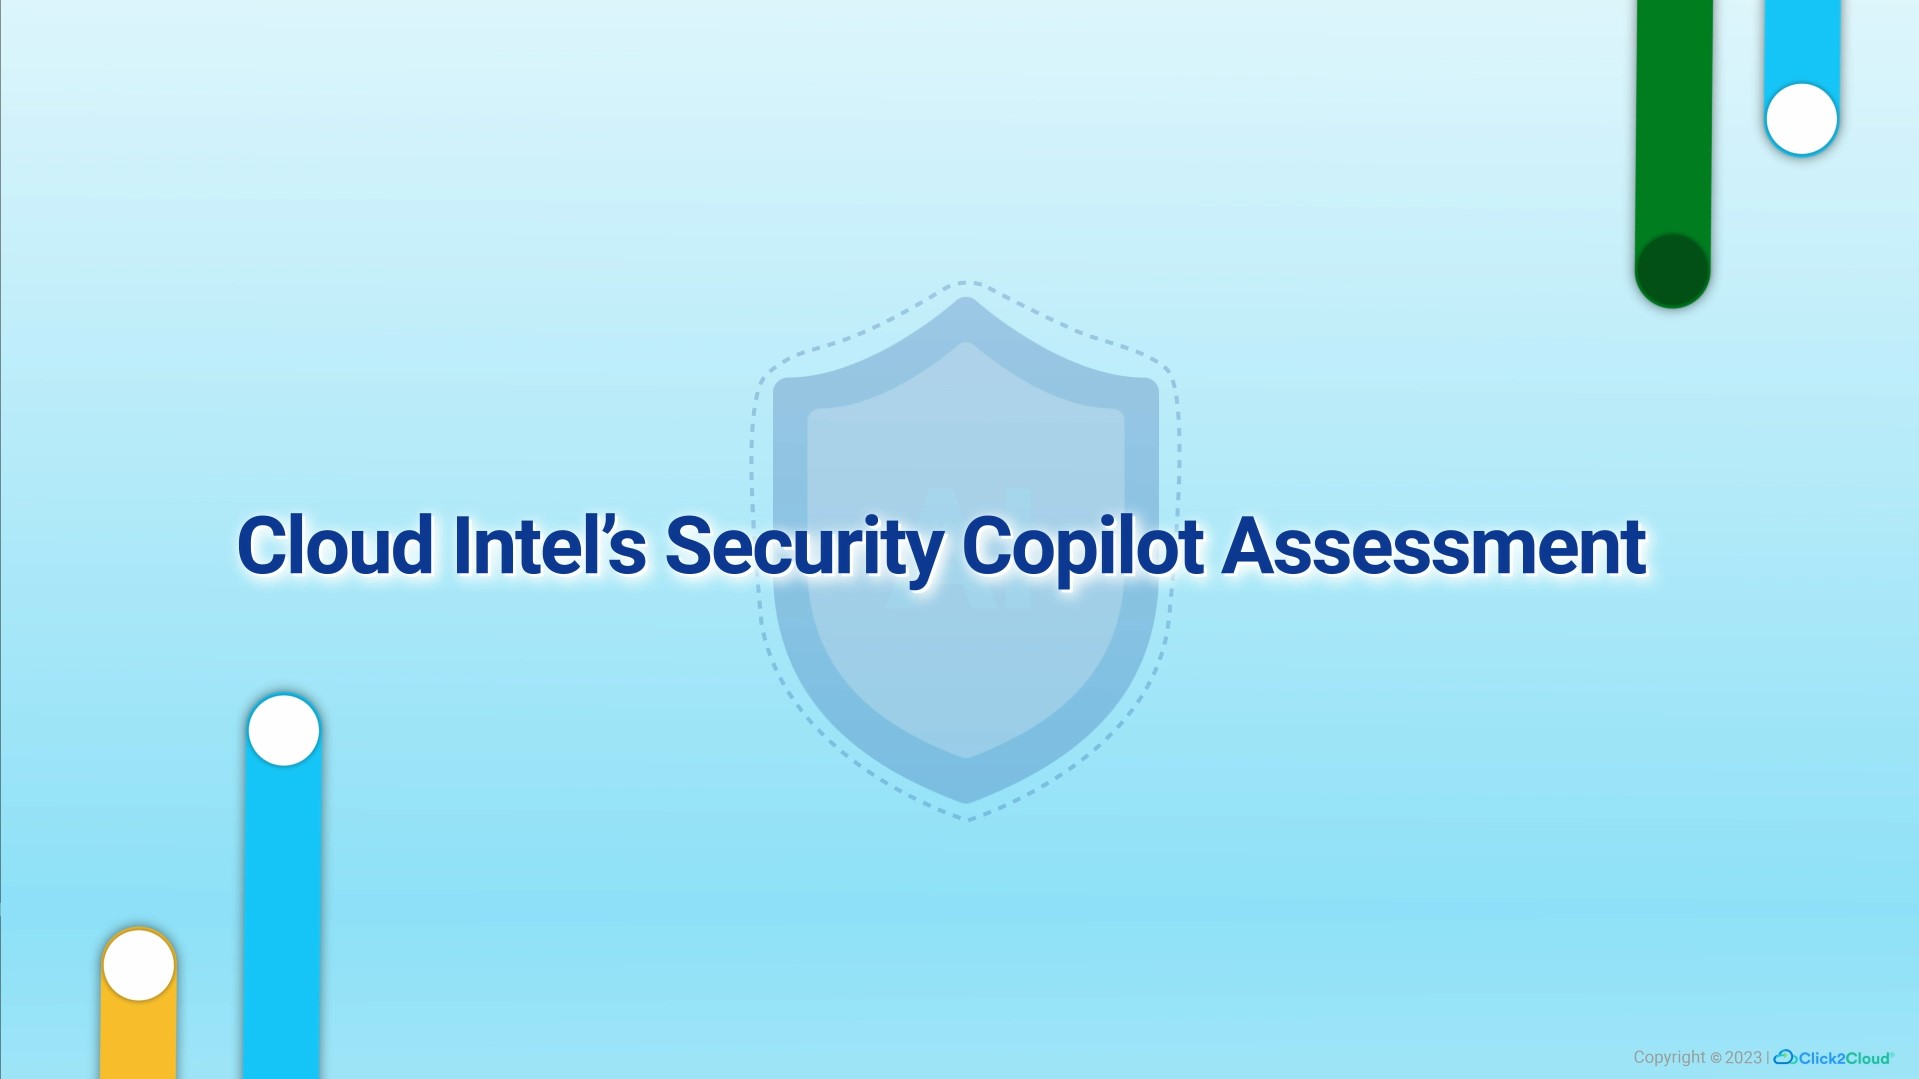 Step into a New Era of AI Security with Cloud Intel’s Security Copilot Assessment-Click2Cloud